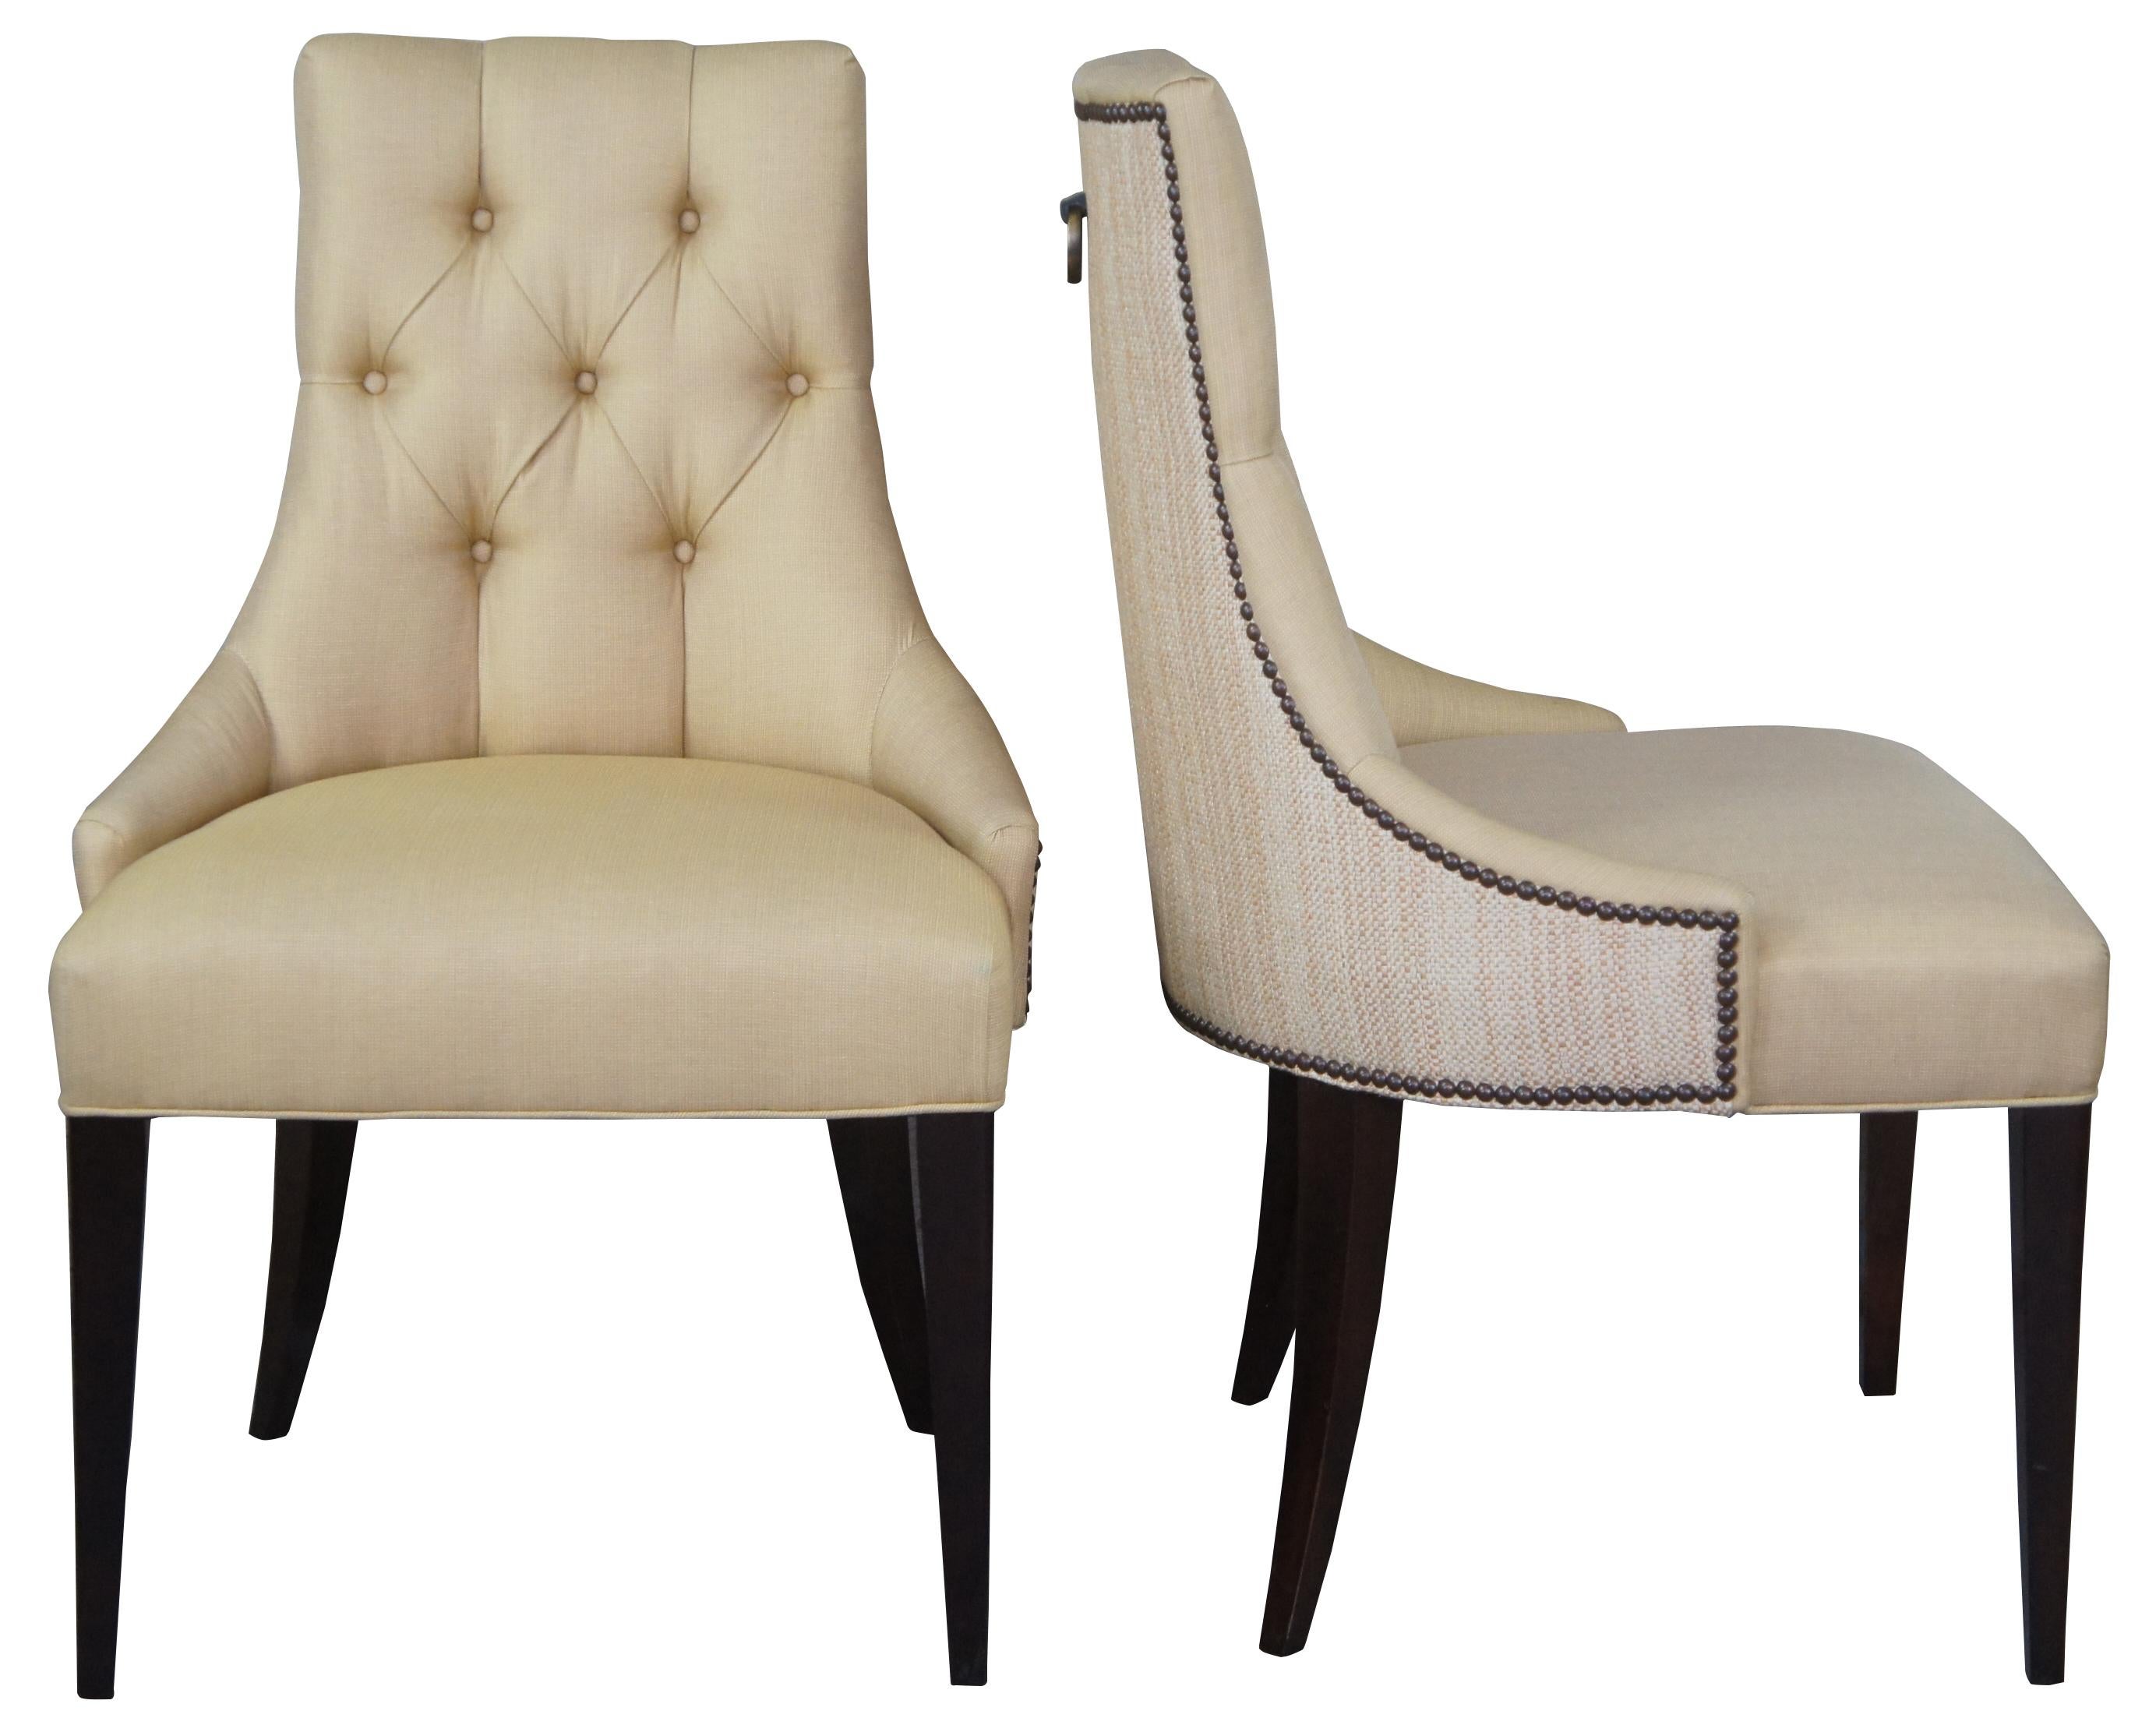 Baker Furniture Thomas Pheasant Ritz dining chairs

Inspired by the salon chairs of the 1940s. The perfect chair to mix with almost any wood frame dining furniture.

Upholstered tight seat and tufted back with metal pull along the back and nail